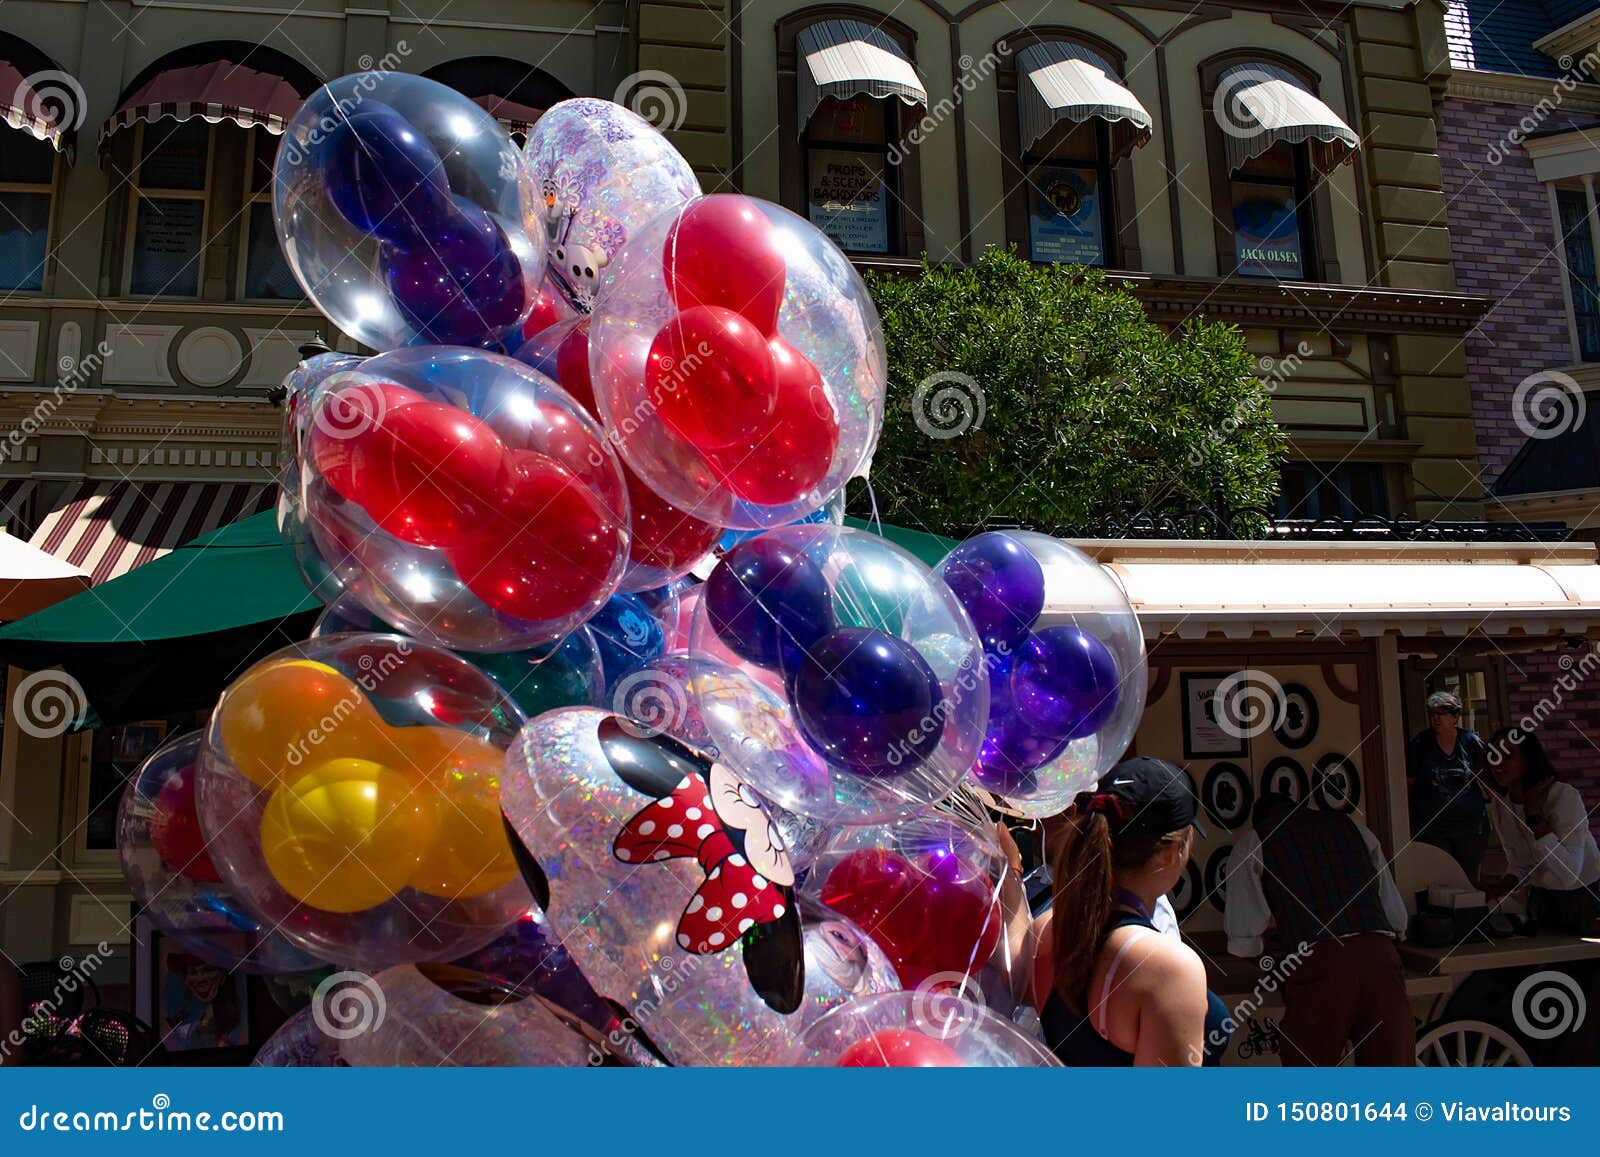 Top View Of Colorful Mickey Balloons In Magic Kingdom At